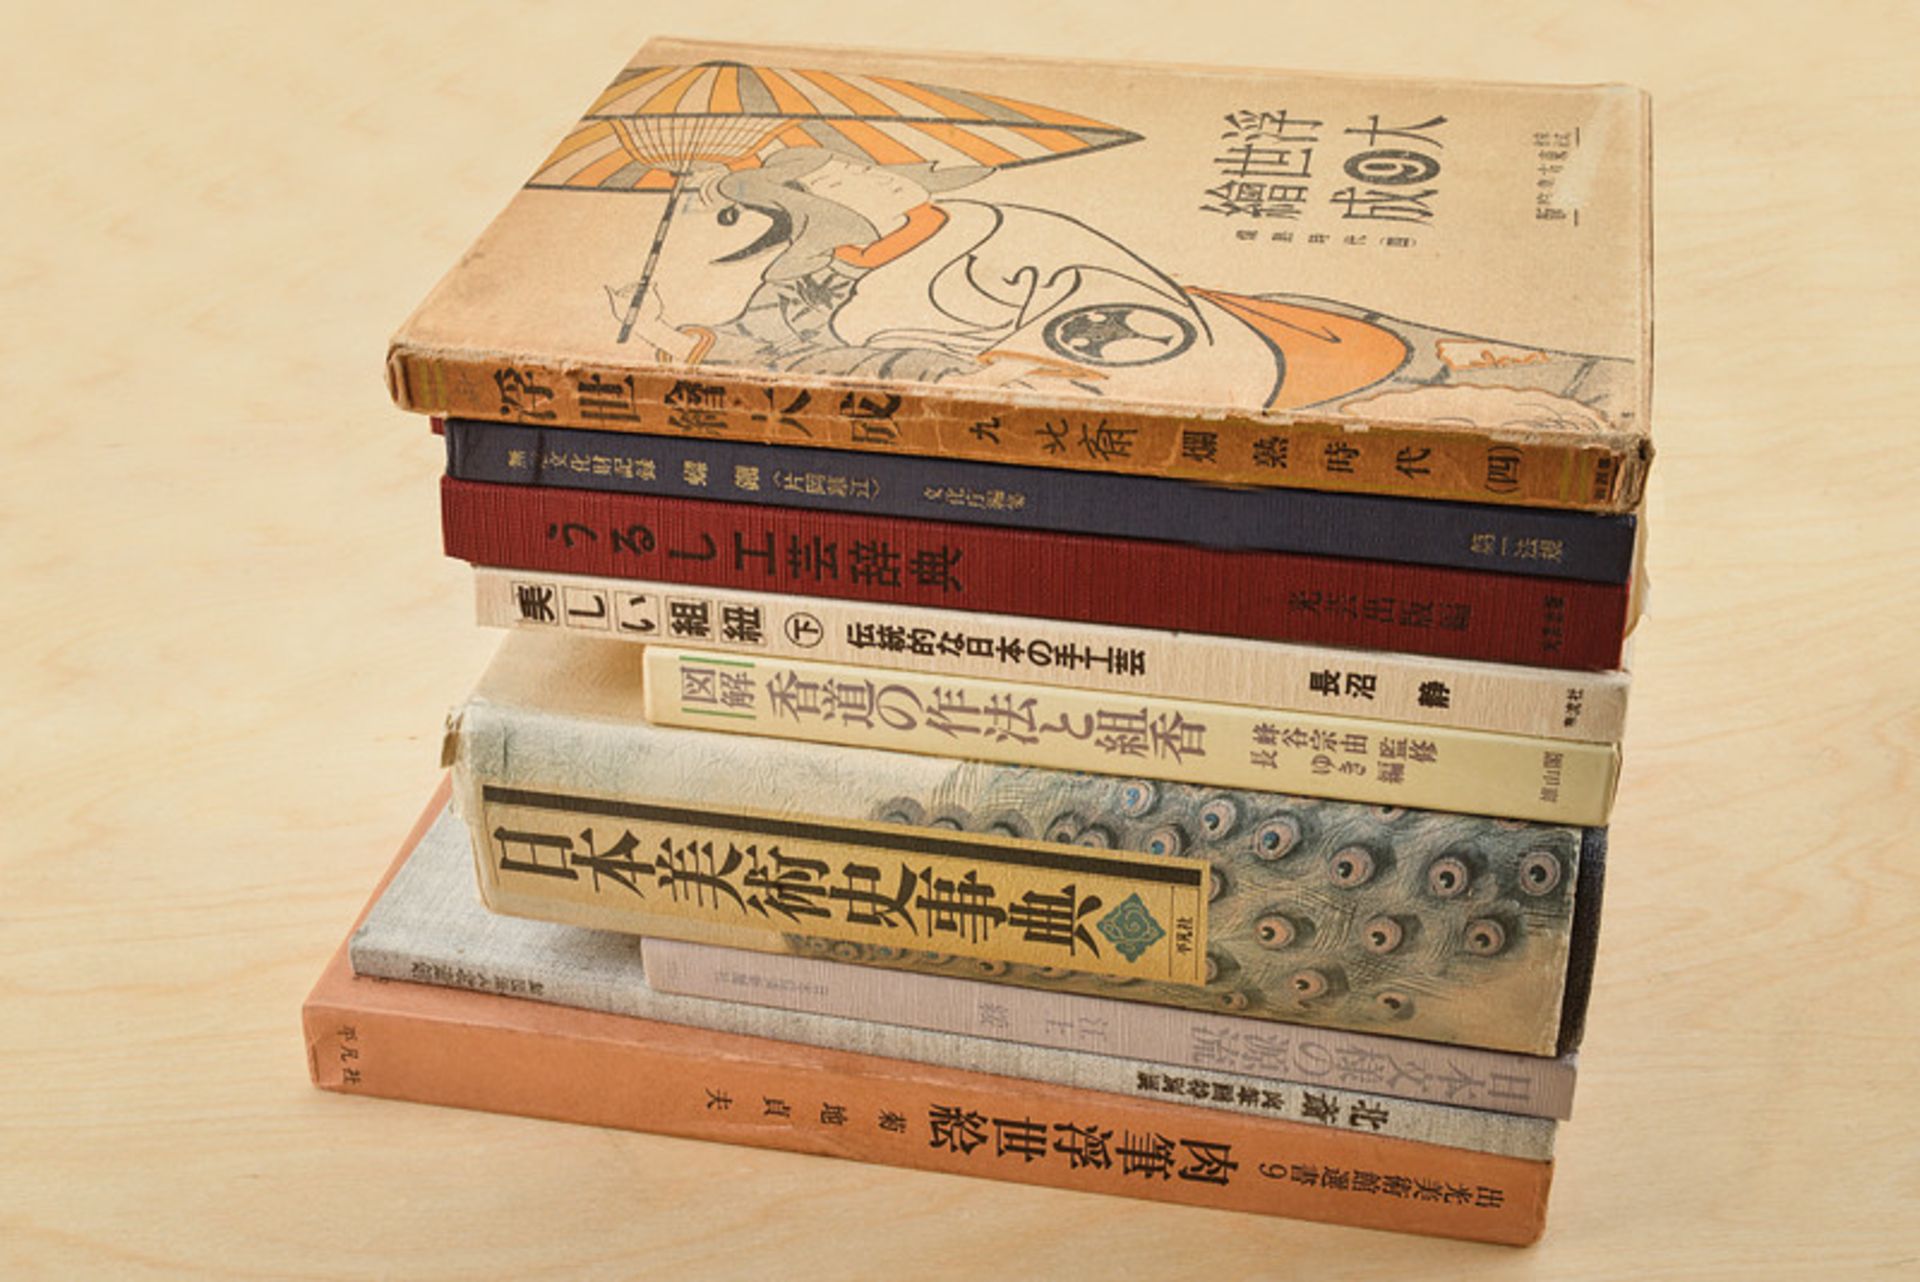 Lot of volumes on Japanese art dating: 20th Century provenance: Japan About prints, painting,